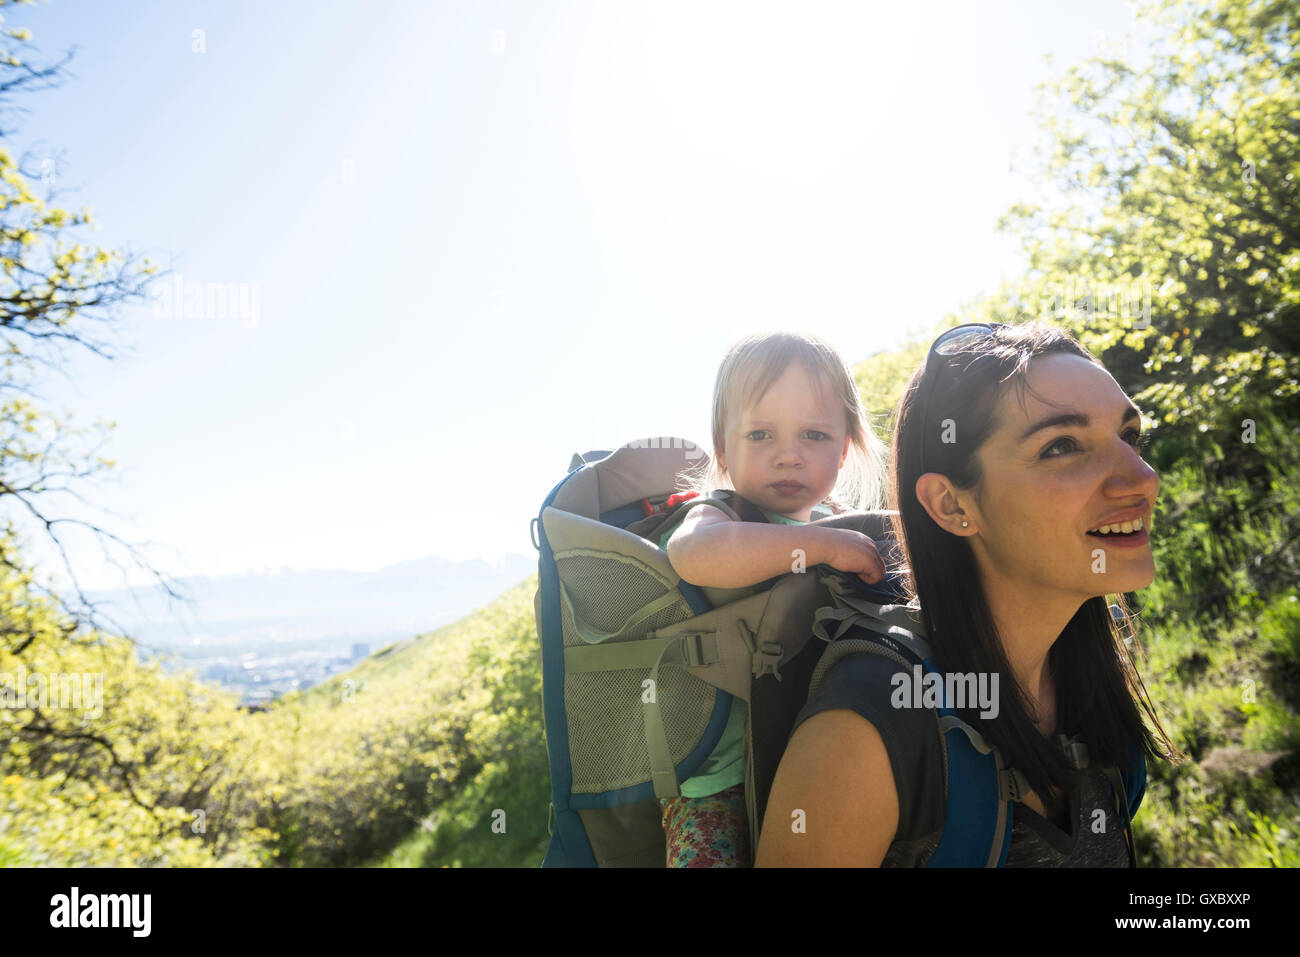 Mother carrying young daughter, hiking the Bonneville Shoreline Trail in the Wasatch Foothills above Salt Lake City, Utah, USA Stock Photo